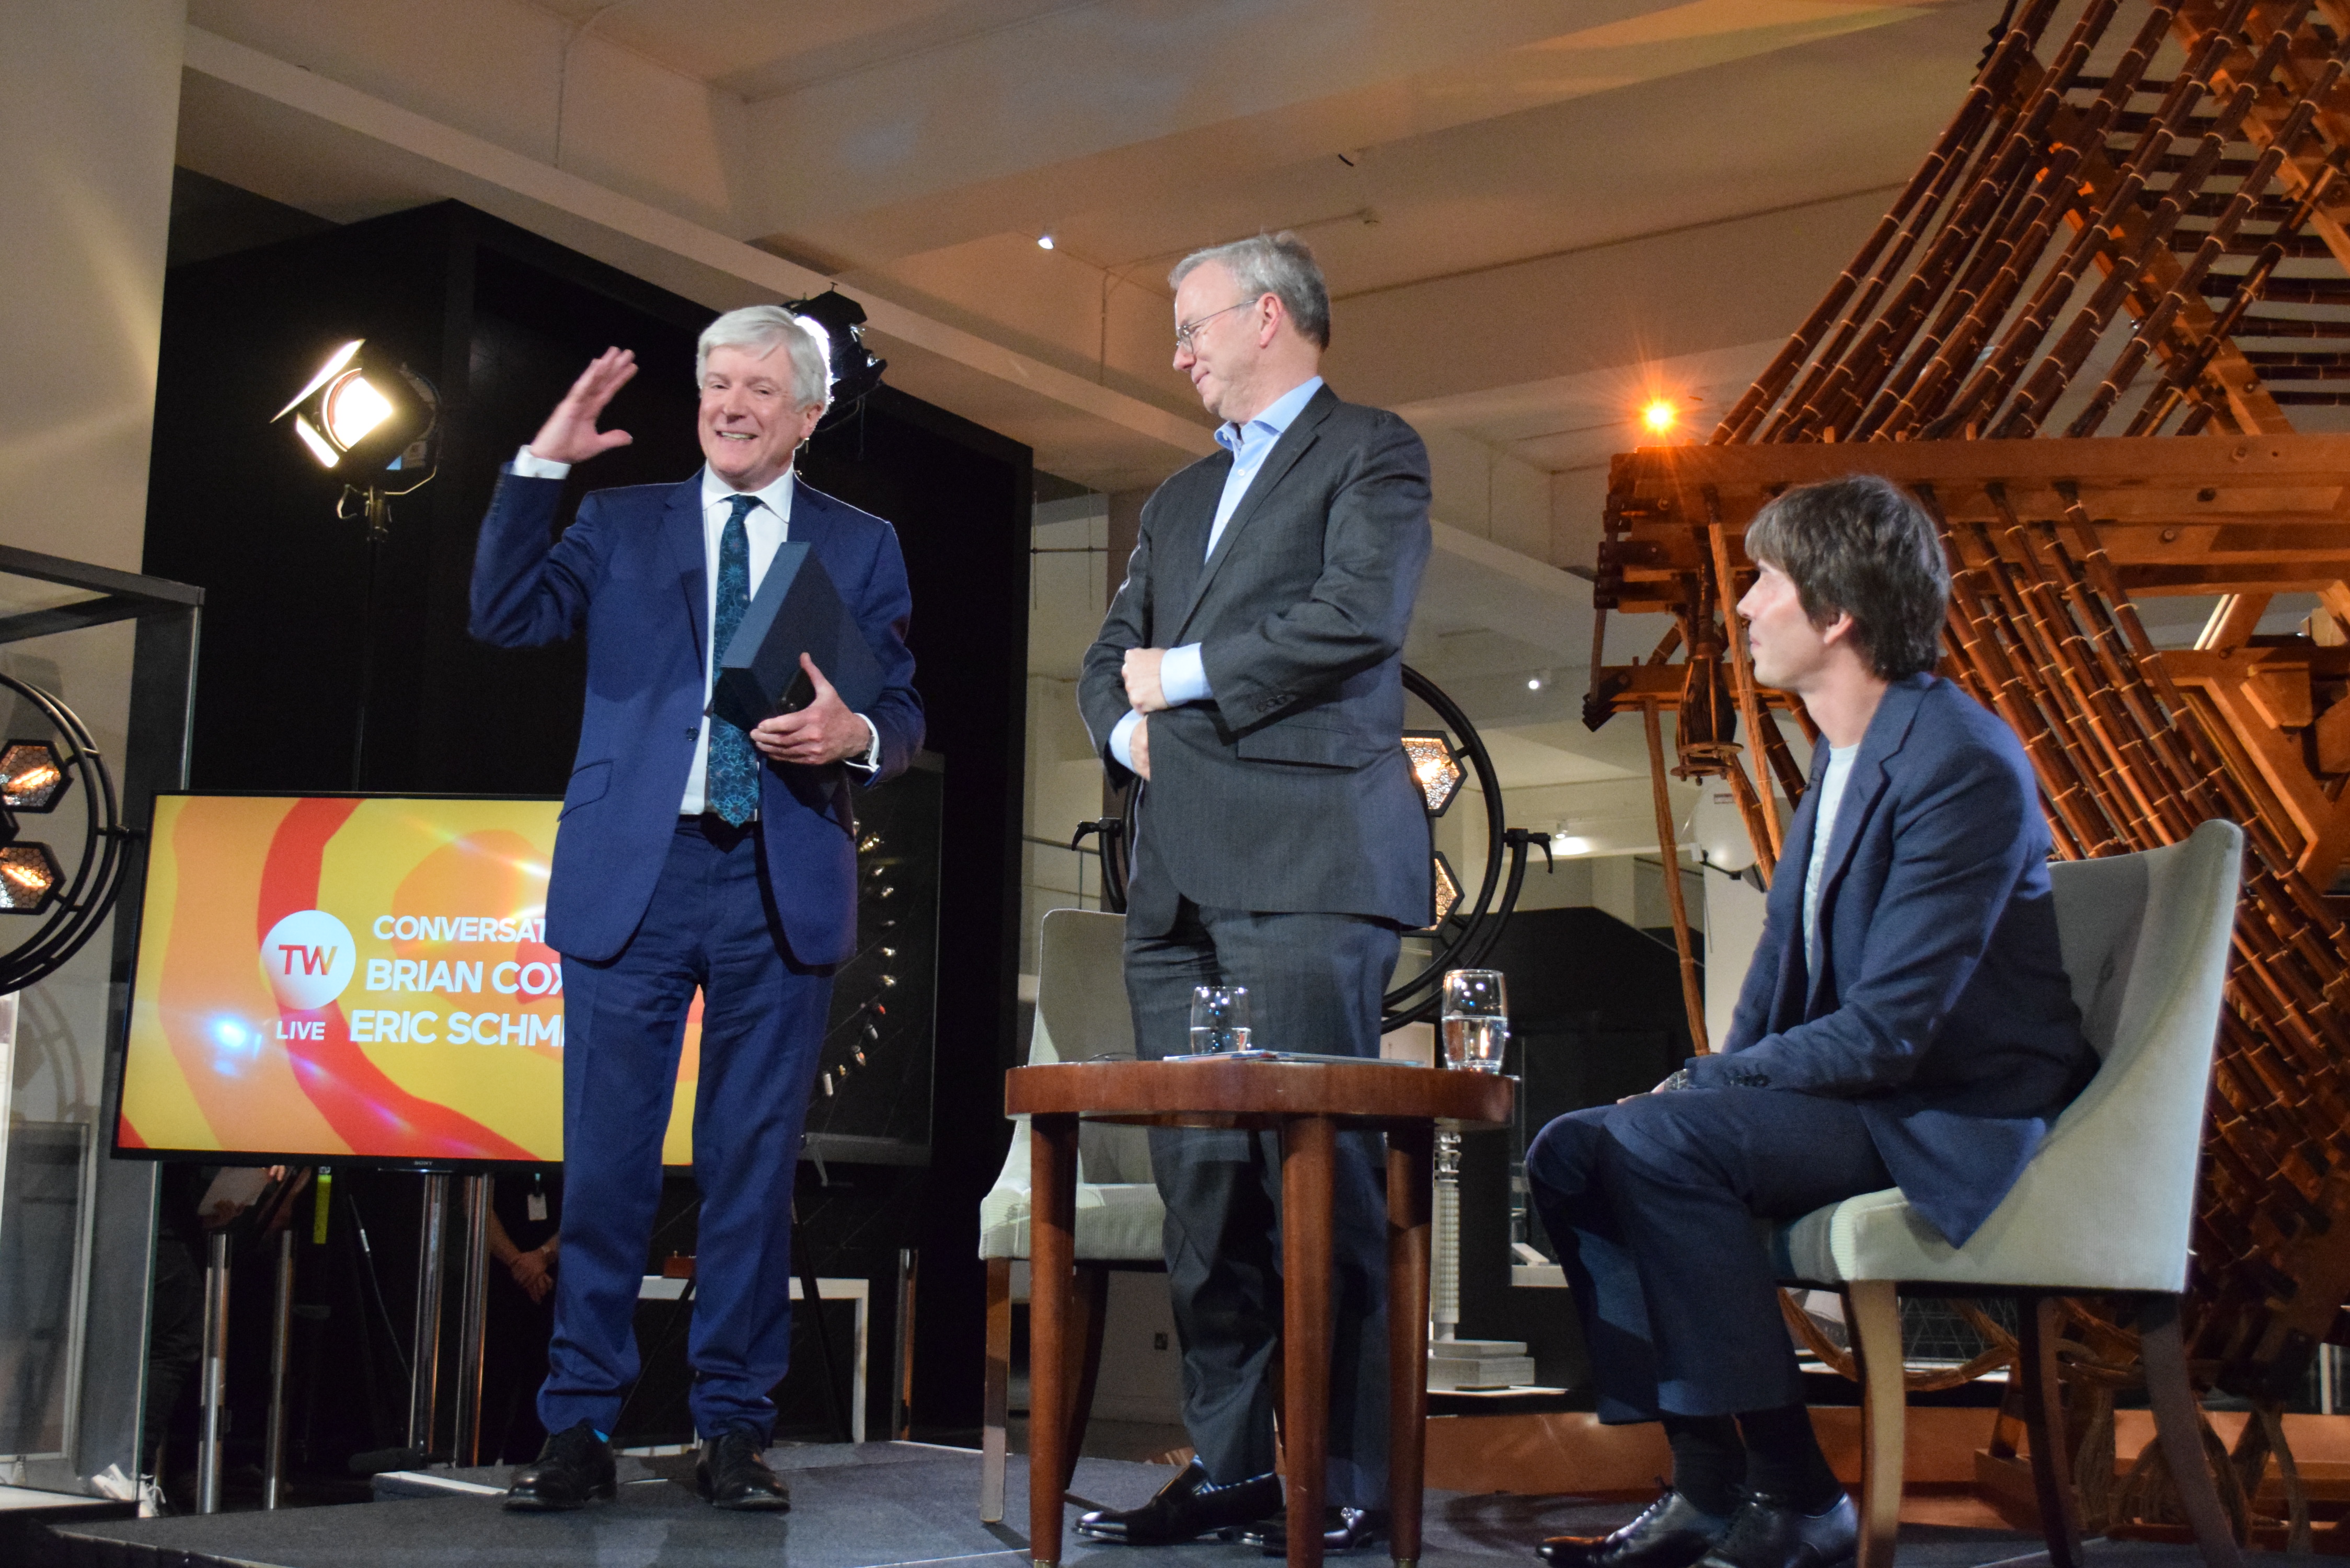 Lord Hall on stage with Brian Cox and Eric Schmidt